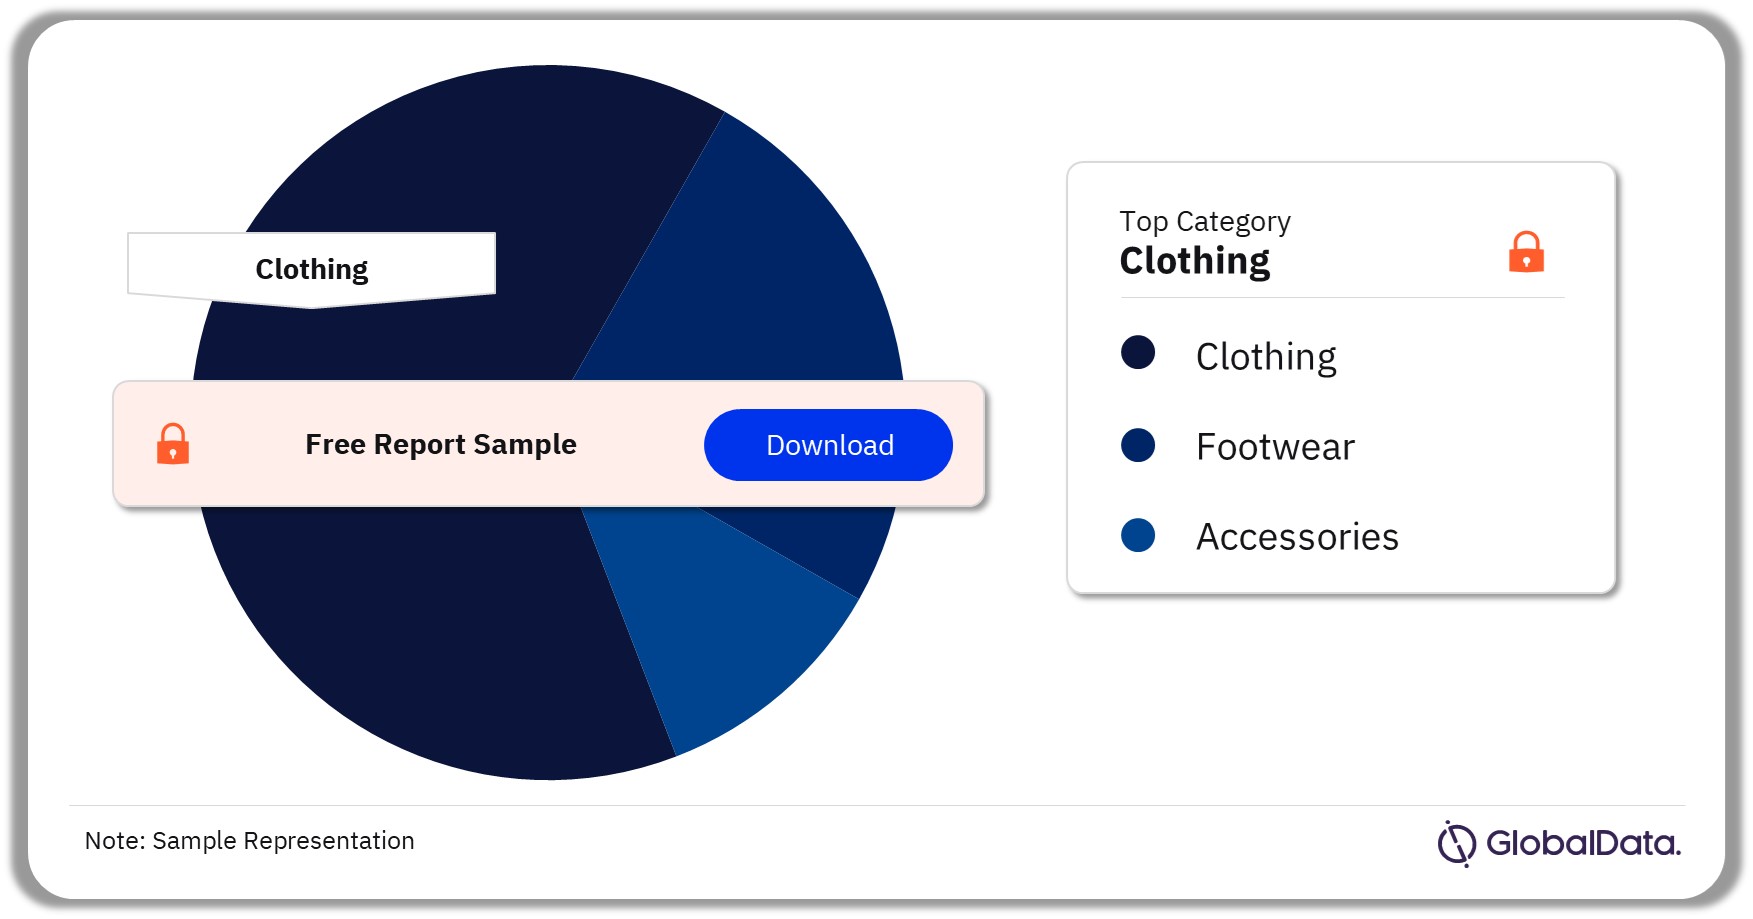 Apparel Rental Market Analysis by Categories, 2023 (%)